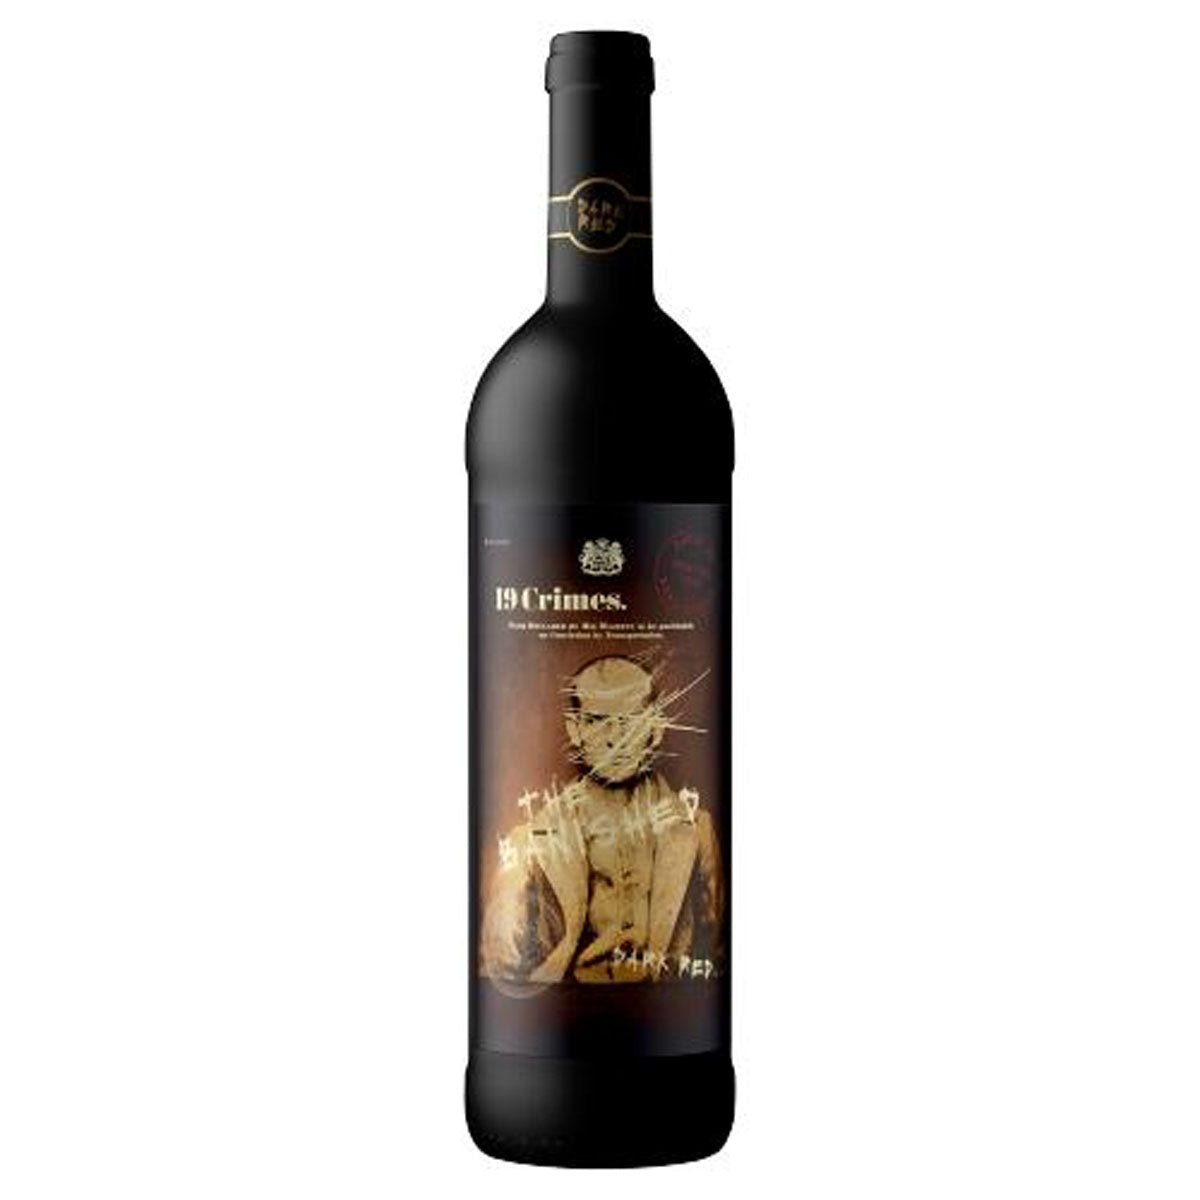 A bottle of 19 Crimes - The Banished Dark Red Wine (13.5% ABV) - 750ml with an image of a man on it.